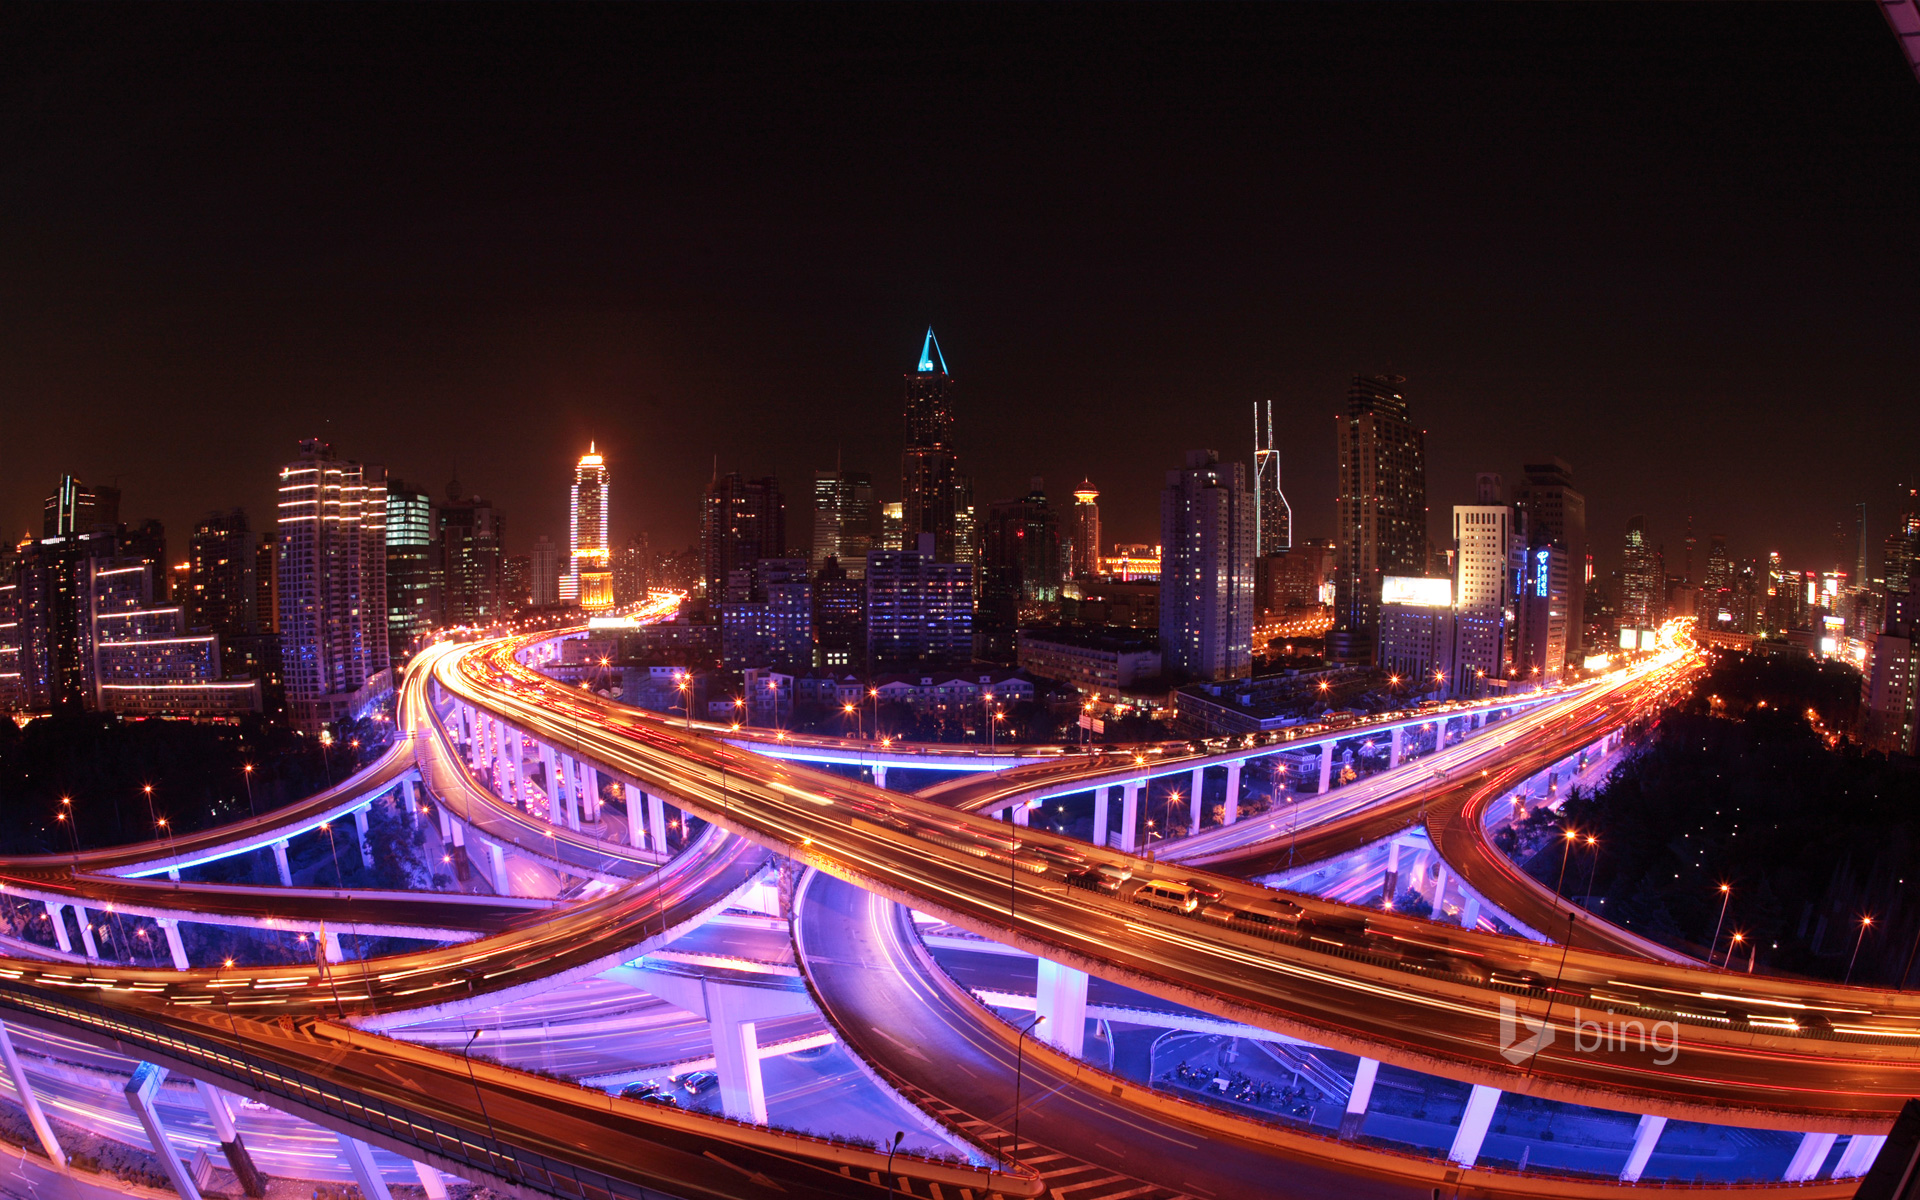 Shanghai's roadways and skyline lit up at night